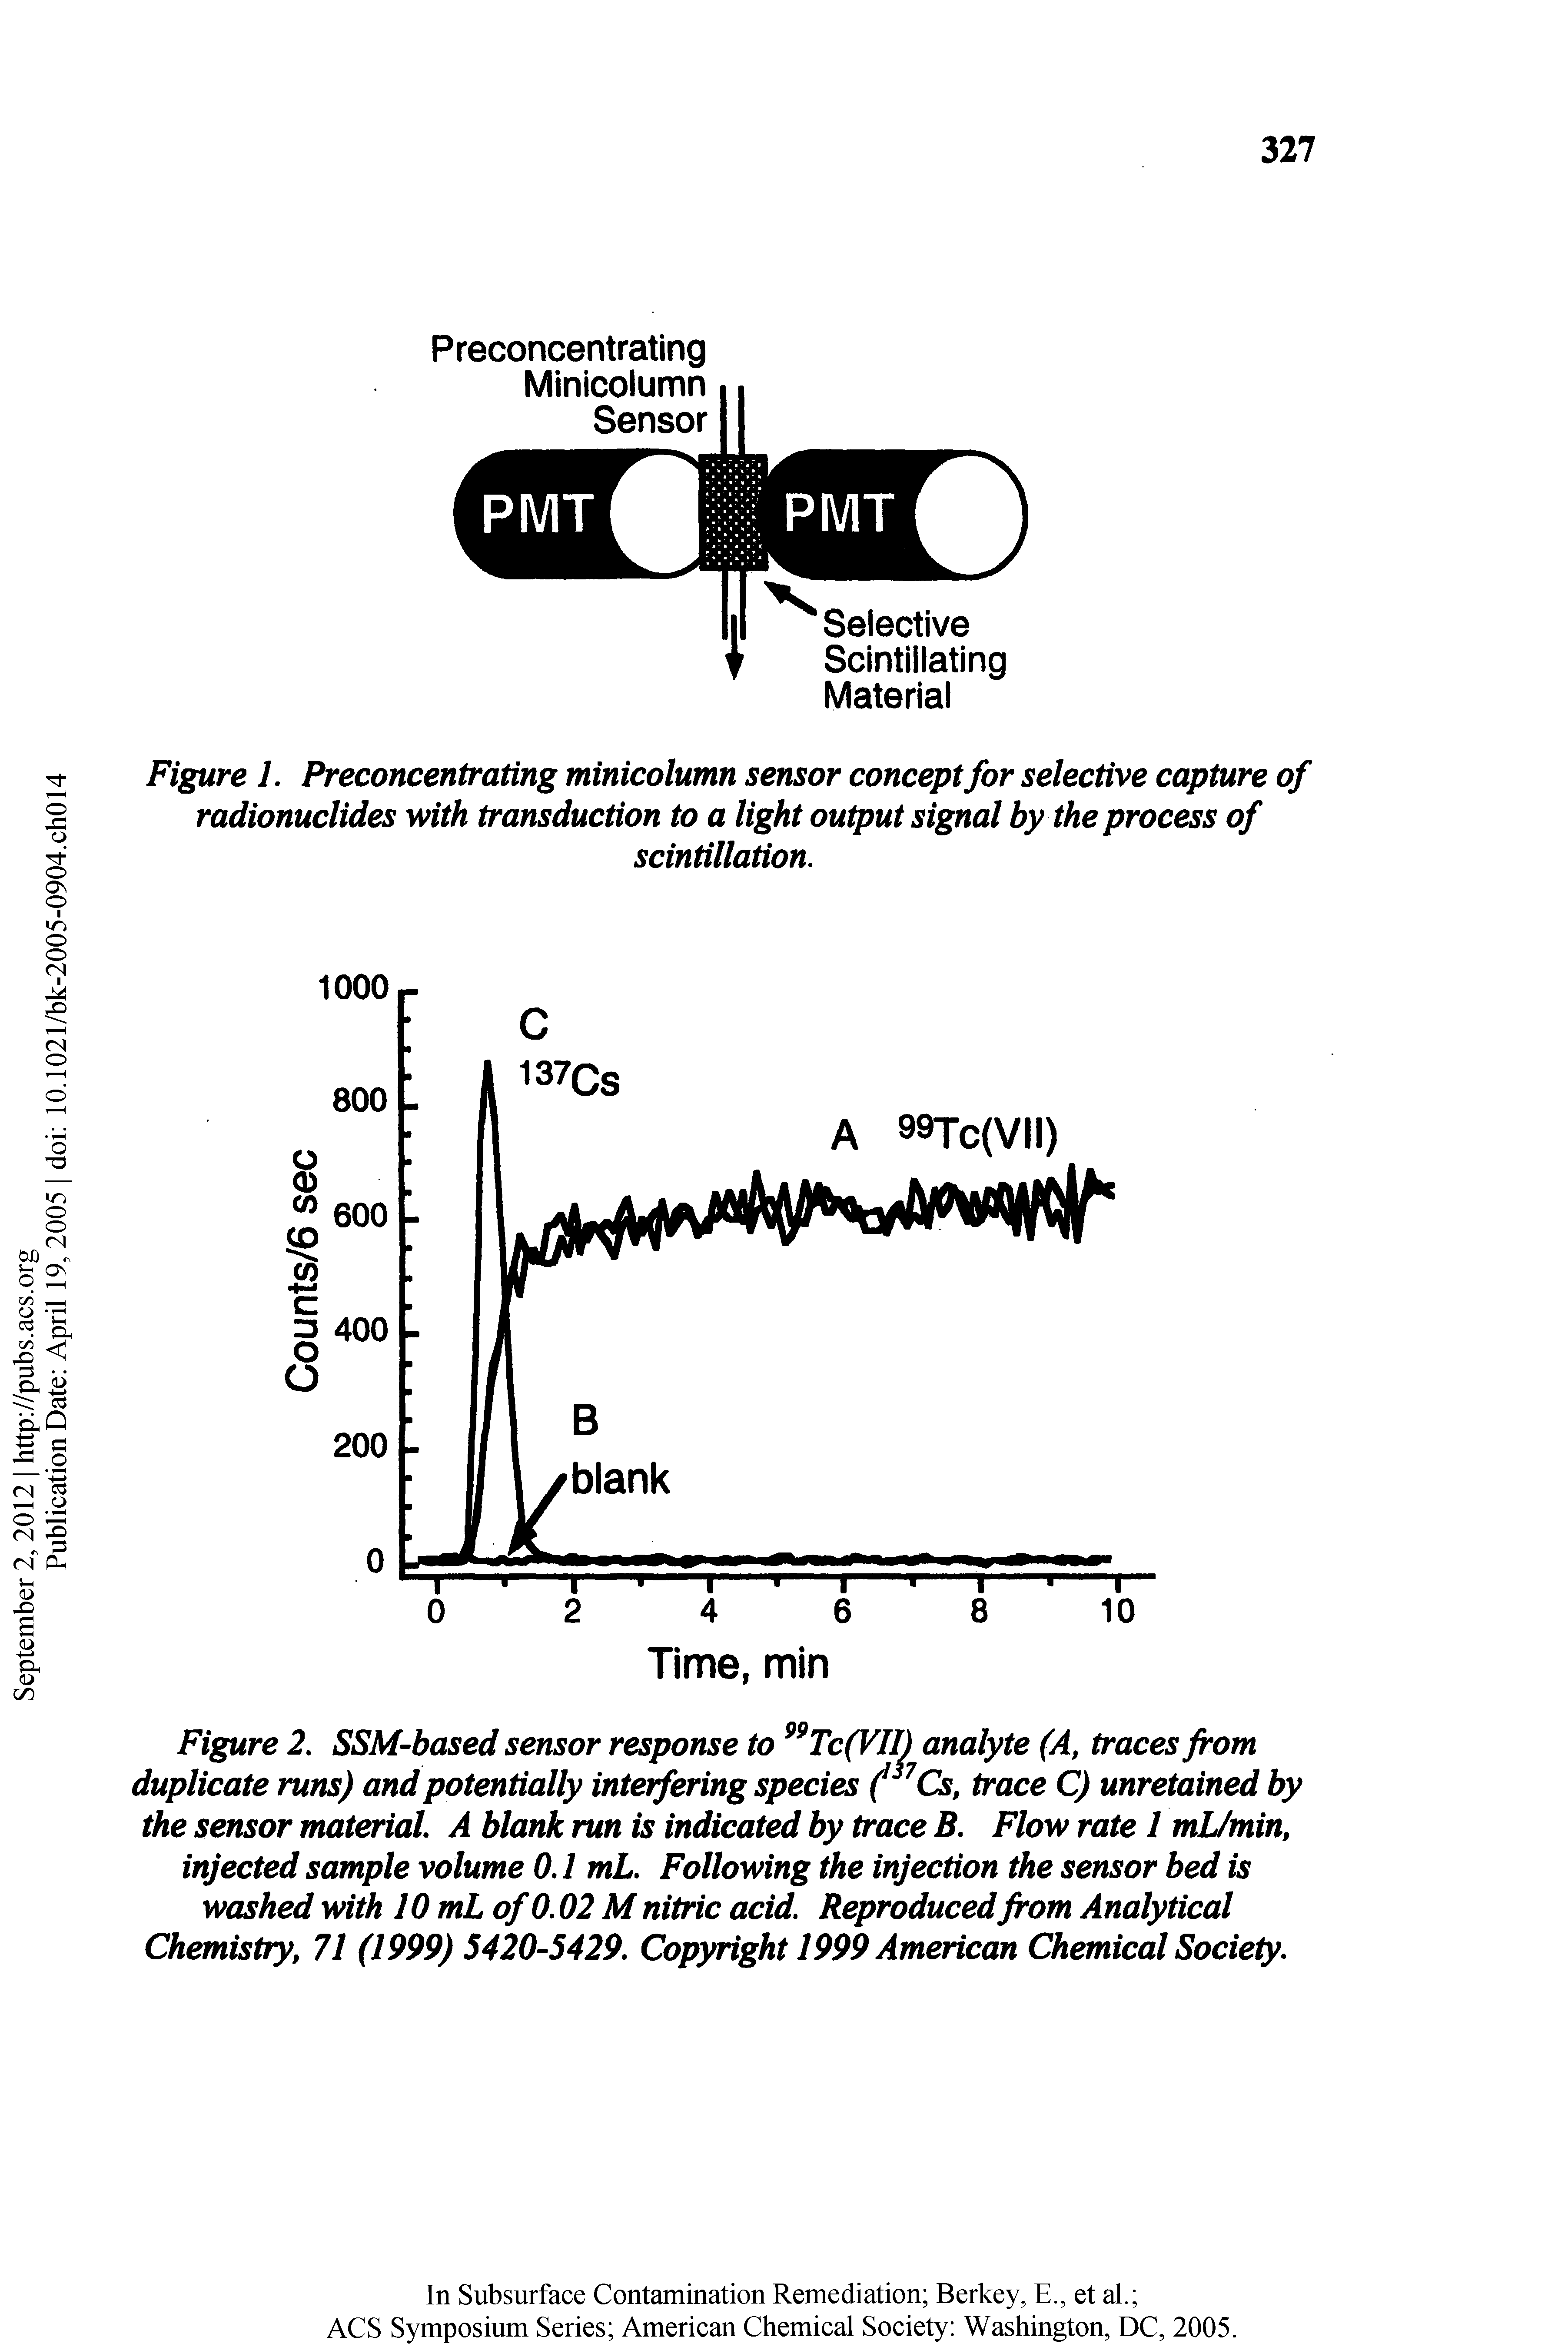 Figure 2. SSM-based sensor response to Tc(VII) analyte (A, traces from duplicate runs) and potentially interfering species Cs, trace C) unretained by the sensor material A blank run is indicated by trace B. Flow rate 1 mL/min, injected sample volume 0.1 mL. Following the injection the sensor bed is washed with 10 mL of 0.02 M nitric acid. Reproduced from Analytical Chemistry, 71 (1999) 5420-5429. Copyright 1999 American Chemical Society.